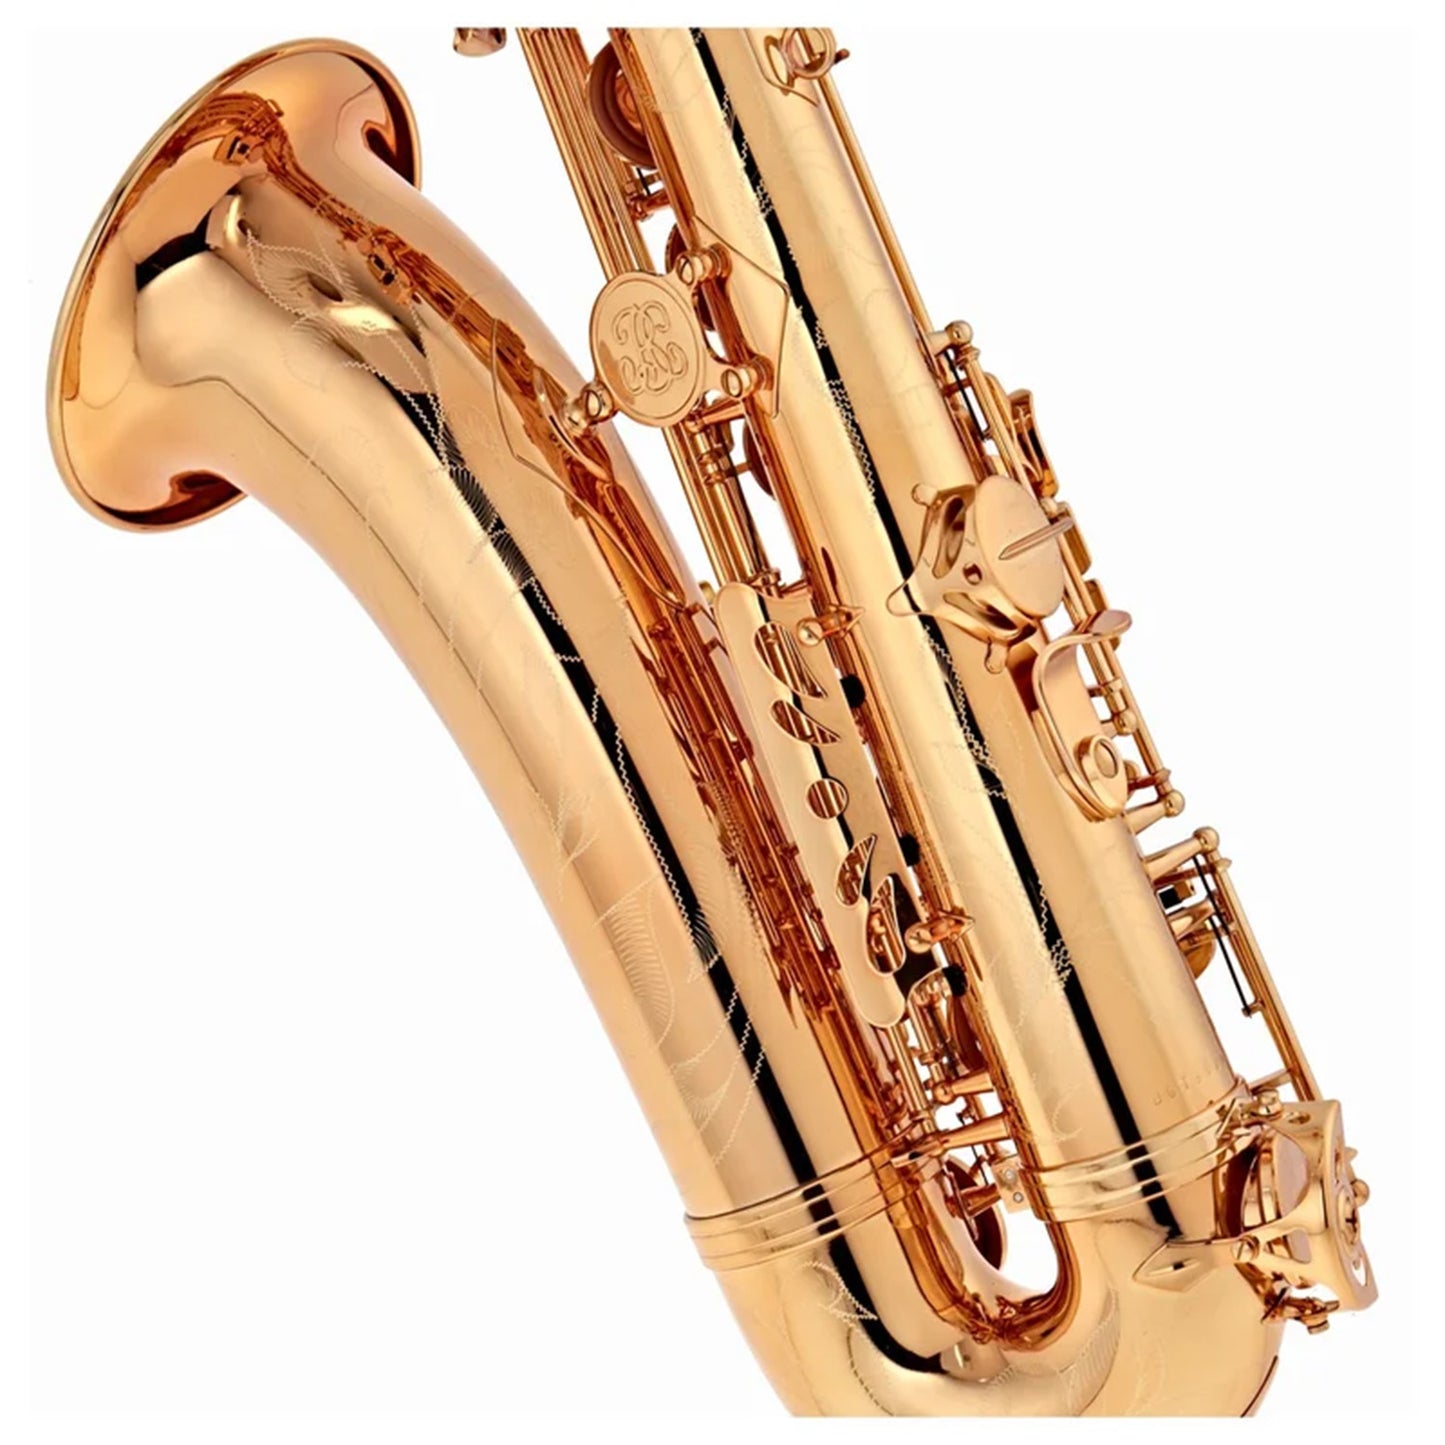 closeup left hand rear view of Buffet 400 tenor saxophone in lacquer finish